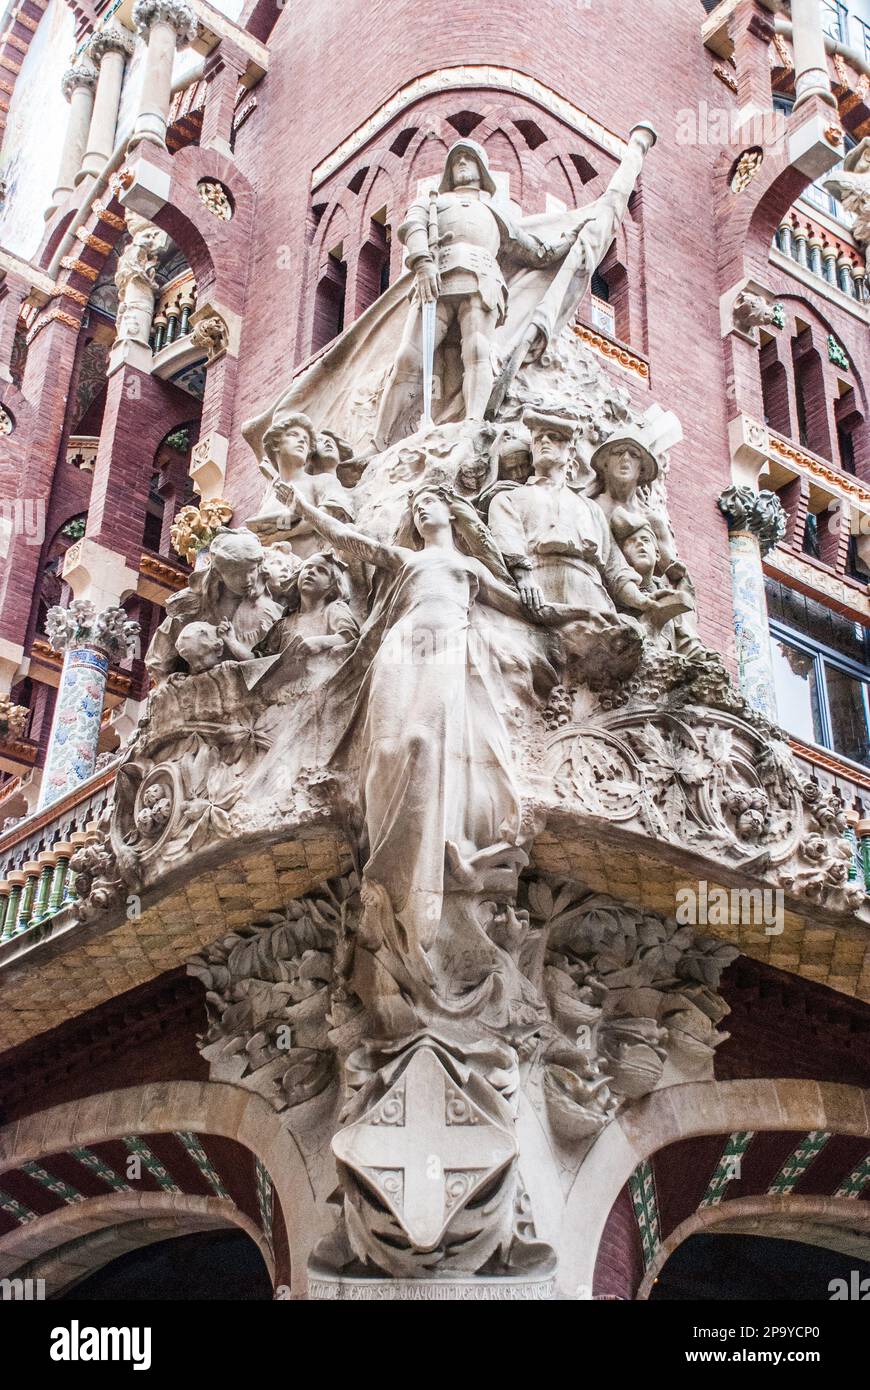 Miguel Blay created a group of sculptures titled “La canción popular catalana” (The Catalan Folk Song) for the facade of the building. Stock Photo